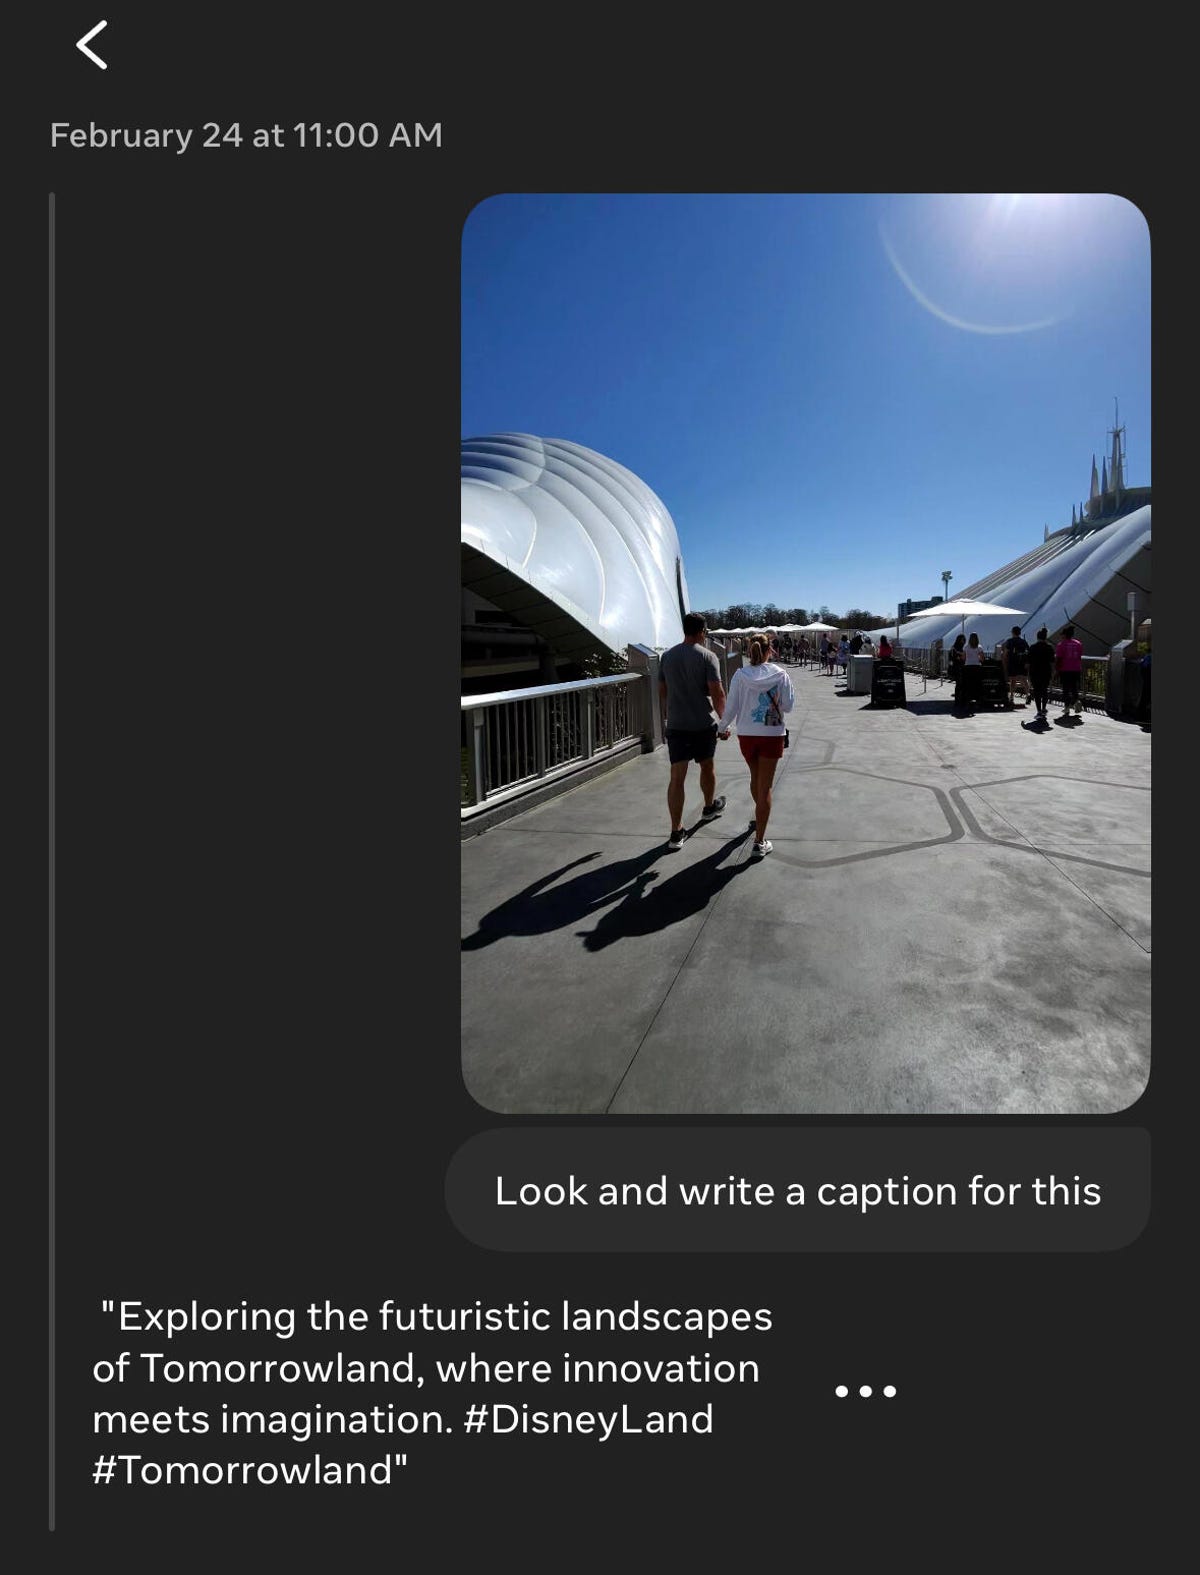 A chat with an AI assistant which is recognizing a photo of Disneyland